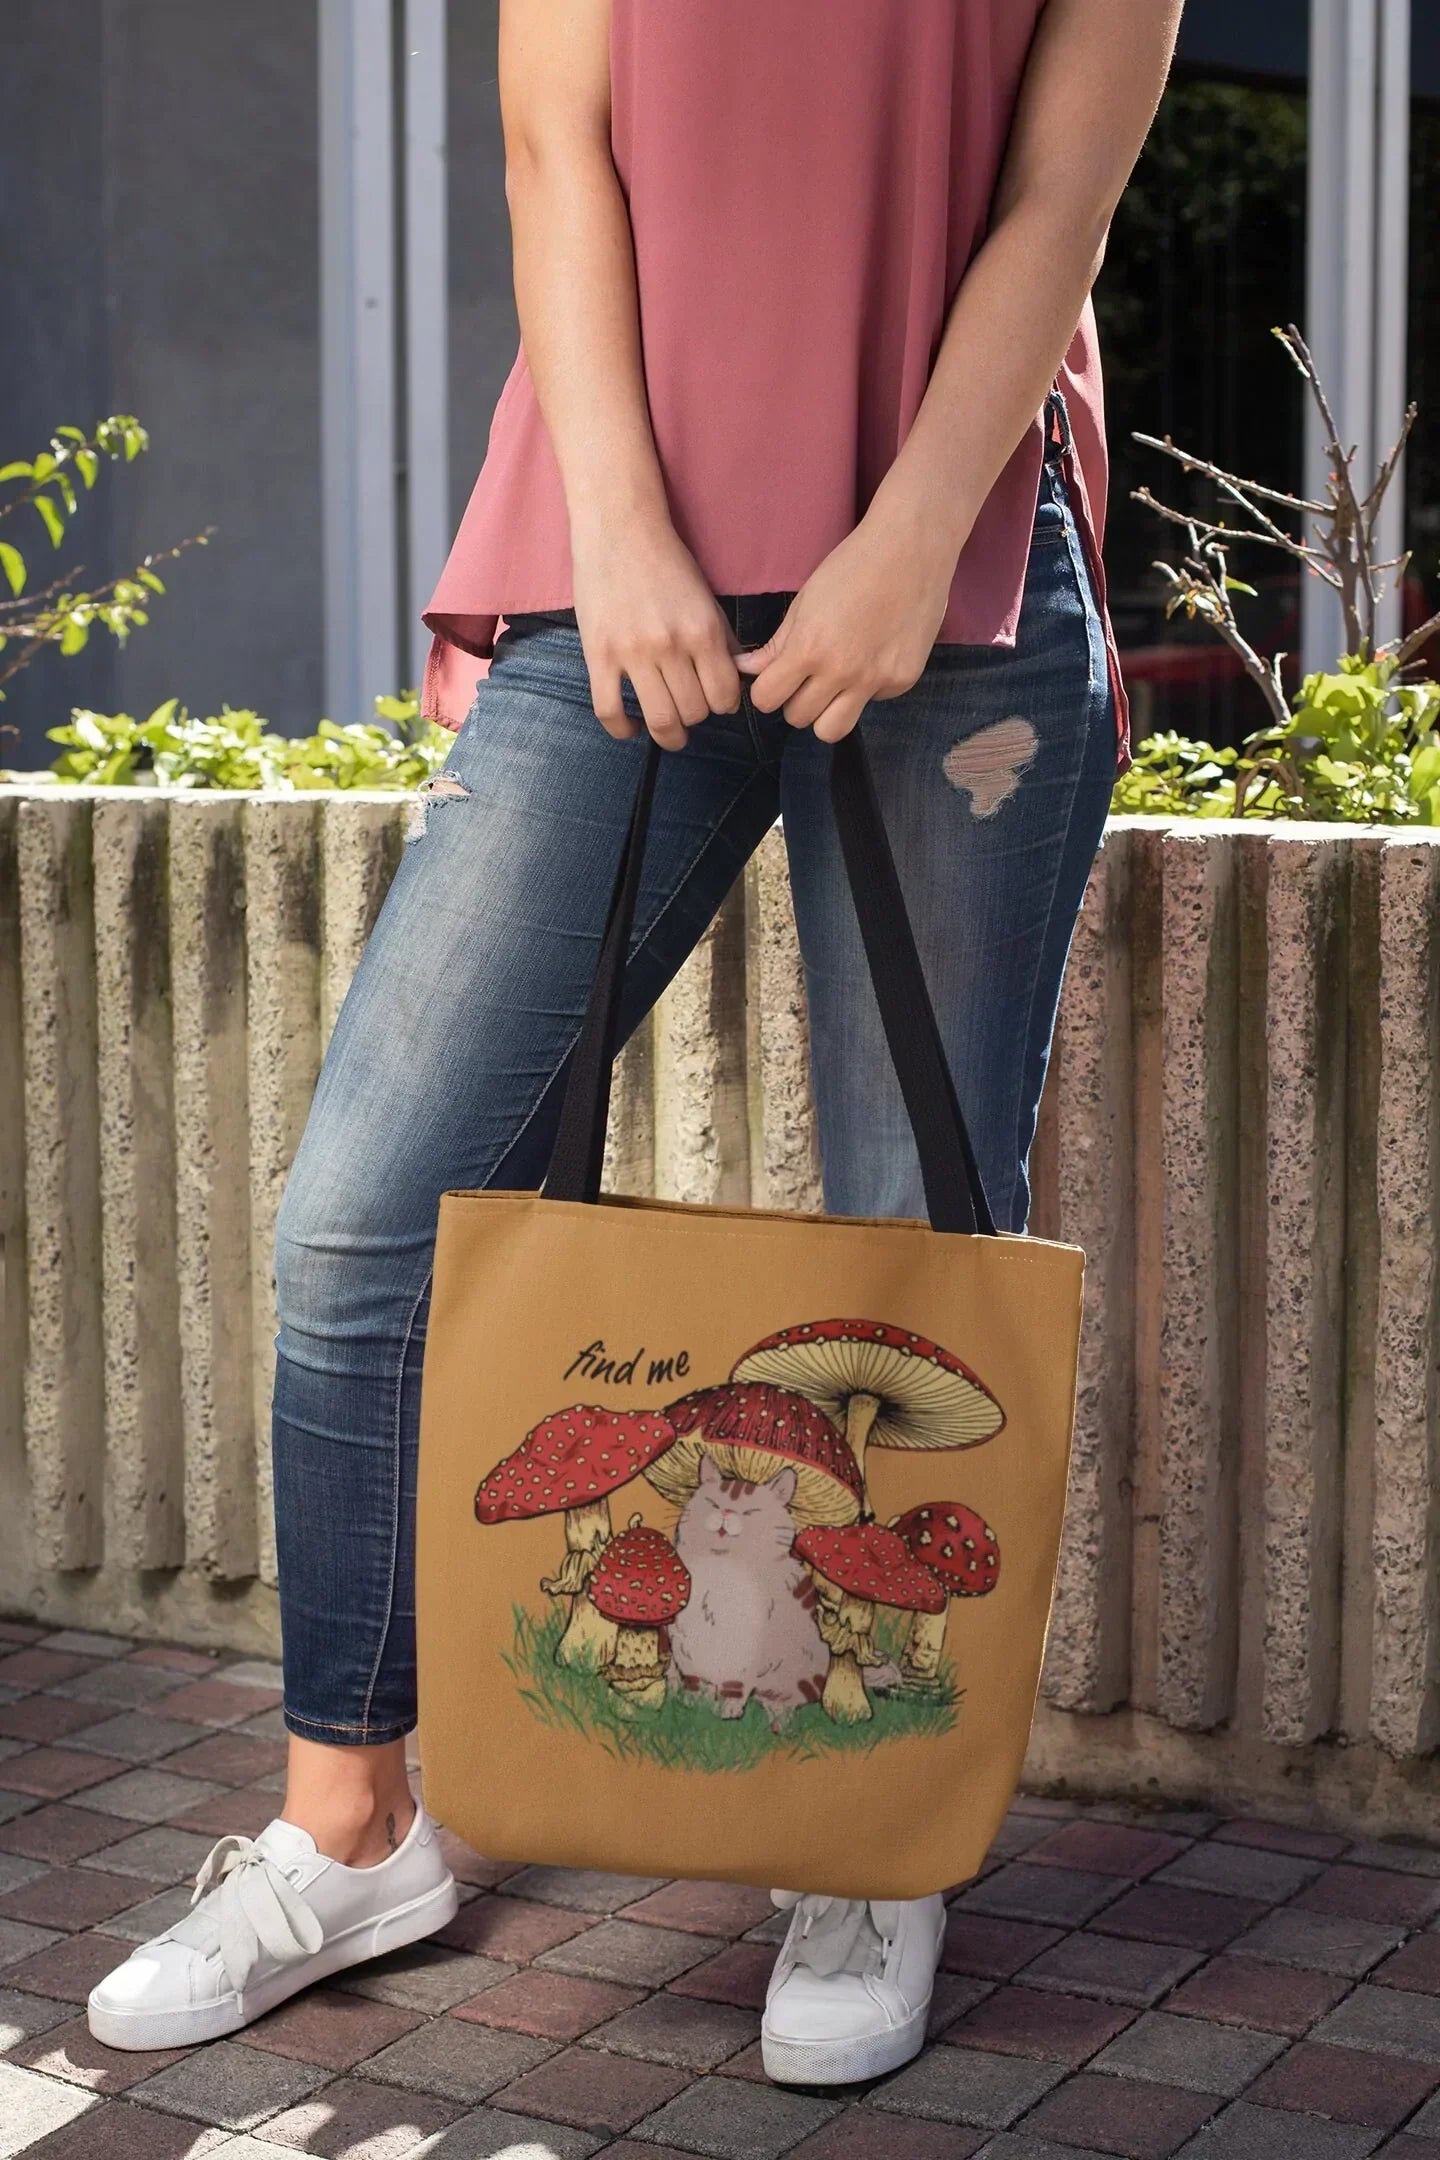 Mushroom Tote Bag, Mushroom Bag, Cat Tote Bag, Cottagecore Lovers Gifts, Dark Academia Reusable Canvas Bag, Hippie Cat Mom Gift, Psychedelic